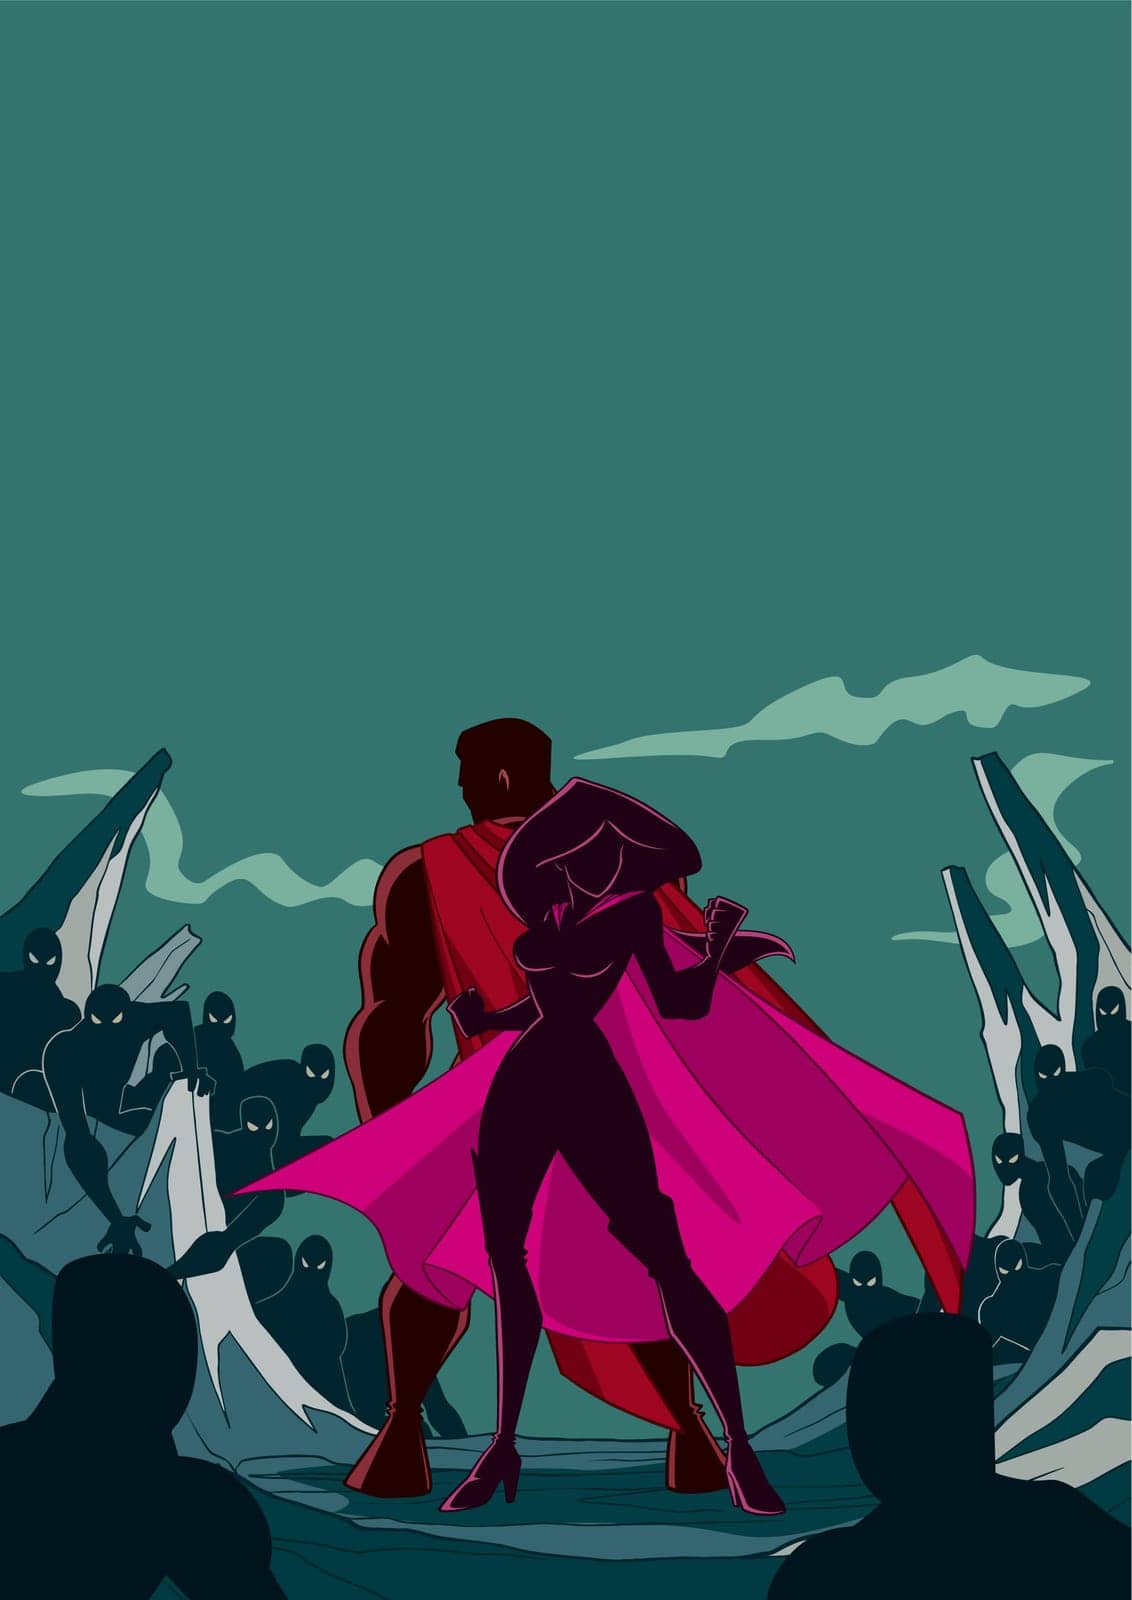 Superhero Couple Back to Back Silhouette by Malchev